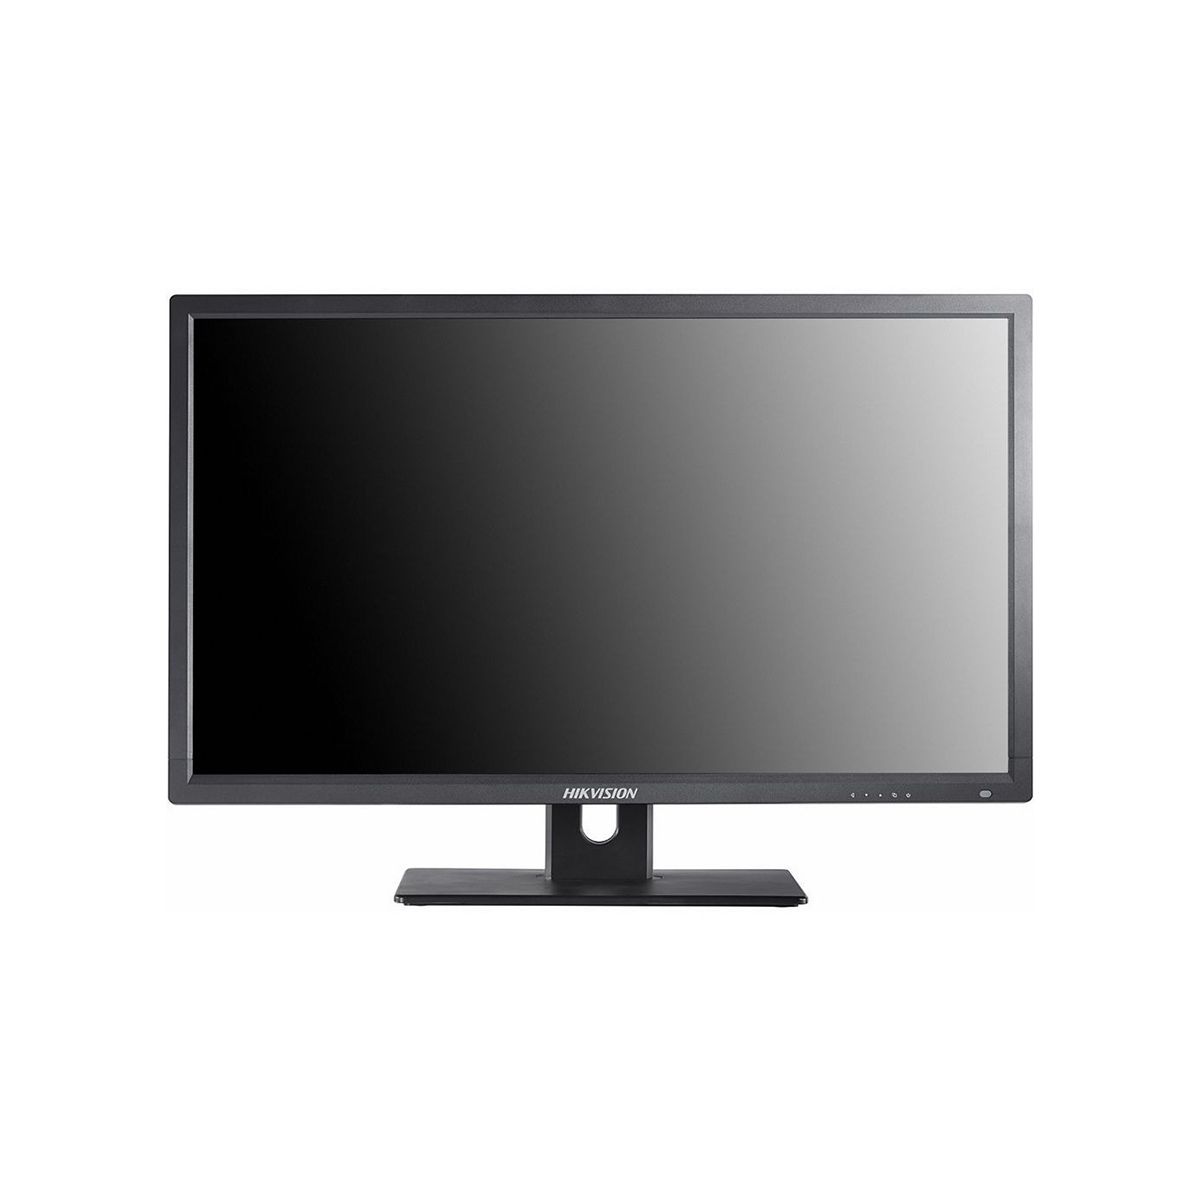 Monitor Hikvision 24 DS-D5024FC Full HD